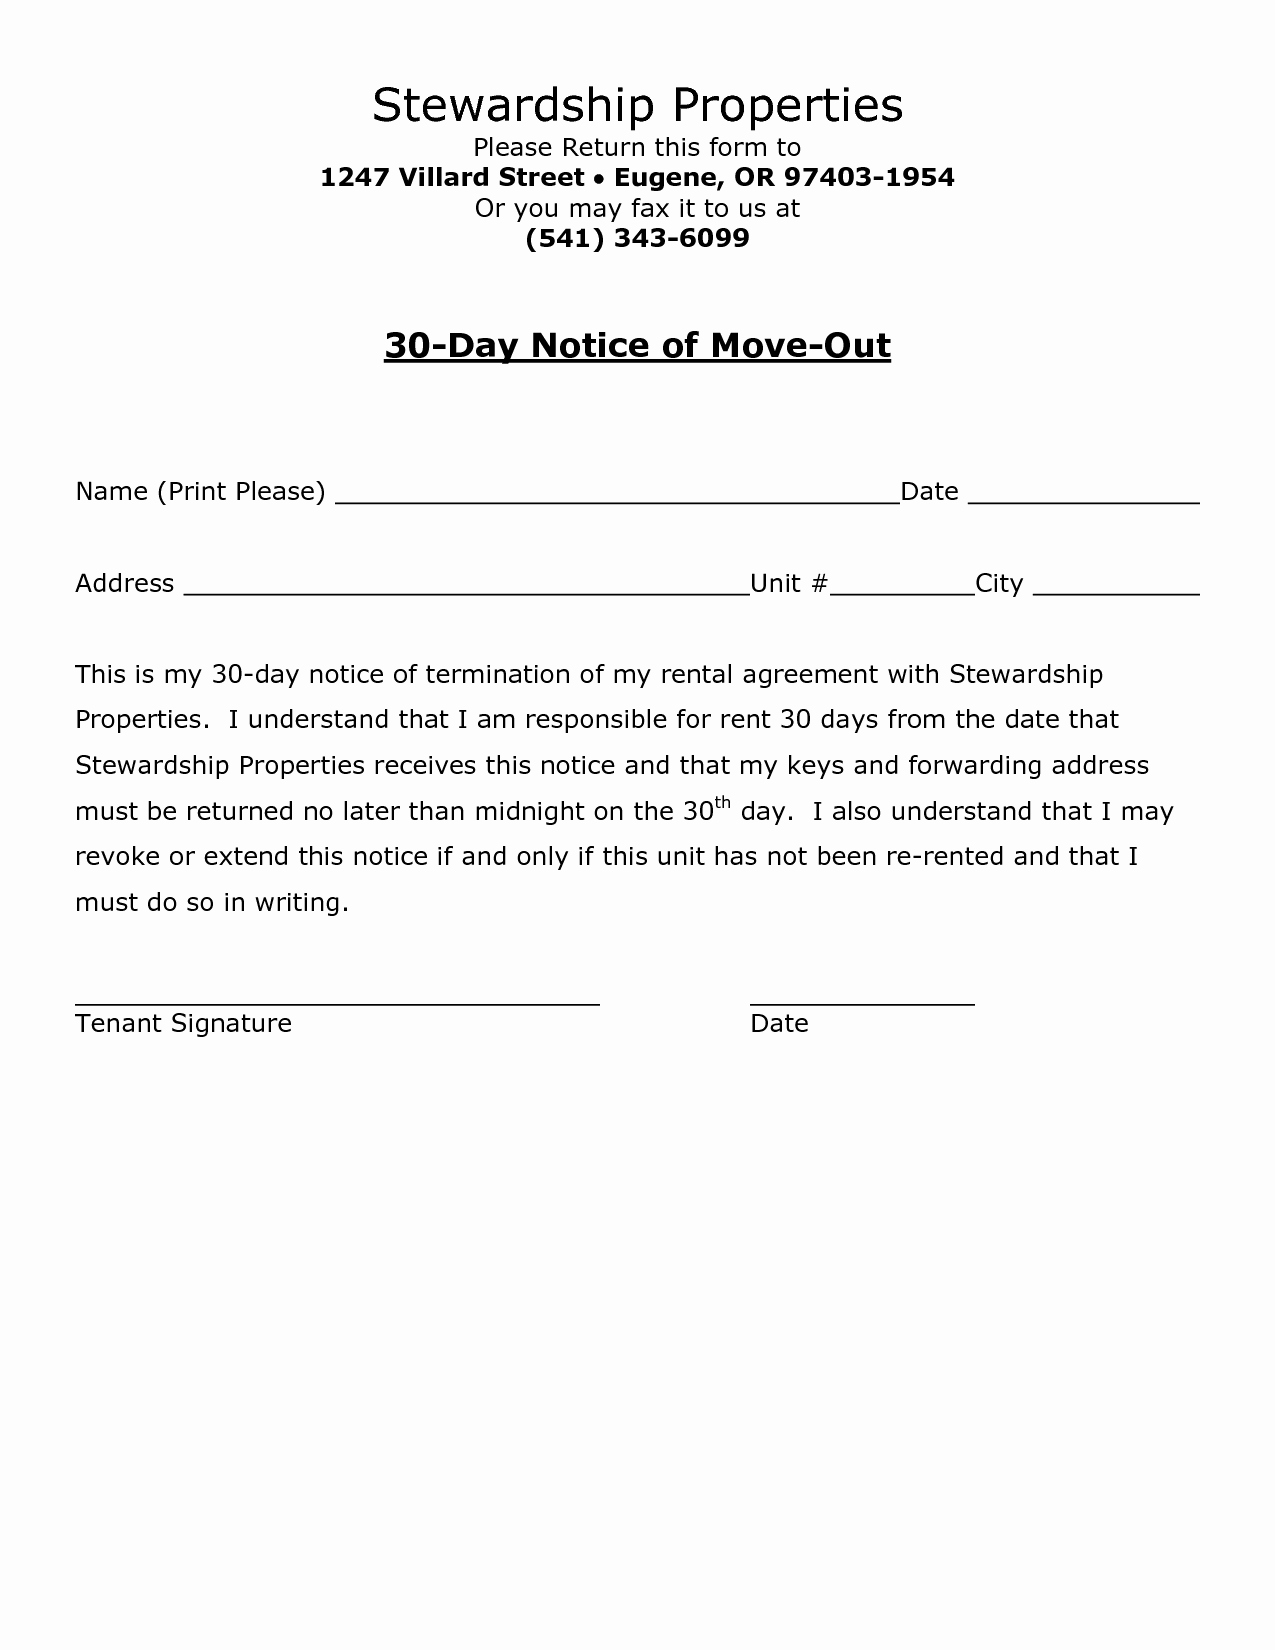 Letter for Tenant to Move Out New Best S Of Move Out Notice to Tenant Template 30 Day